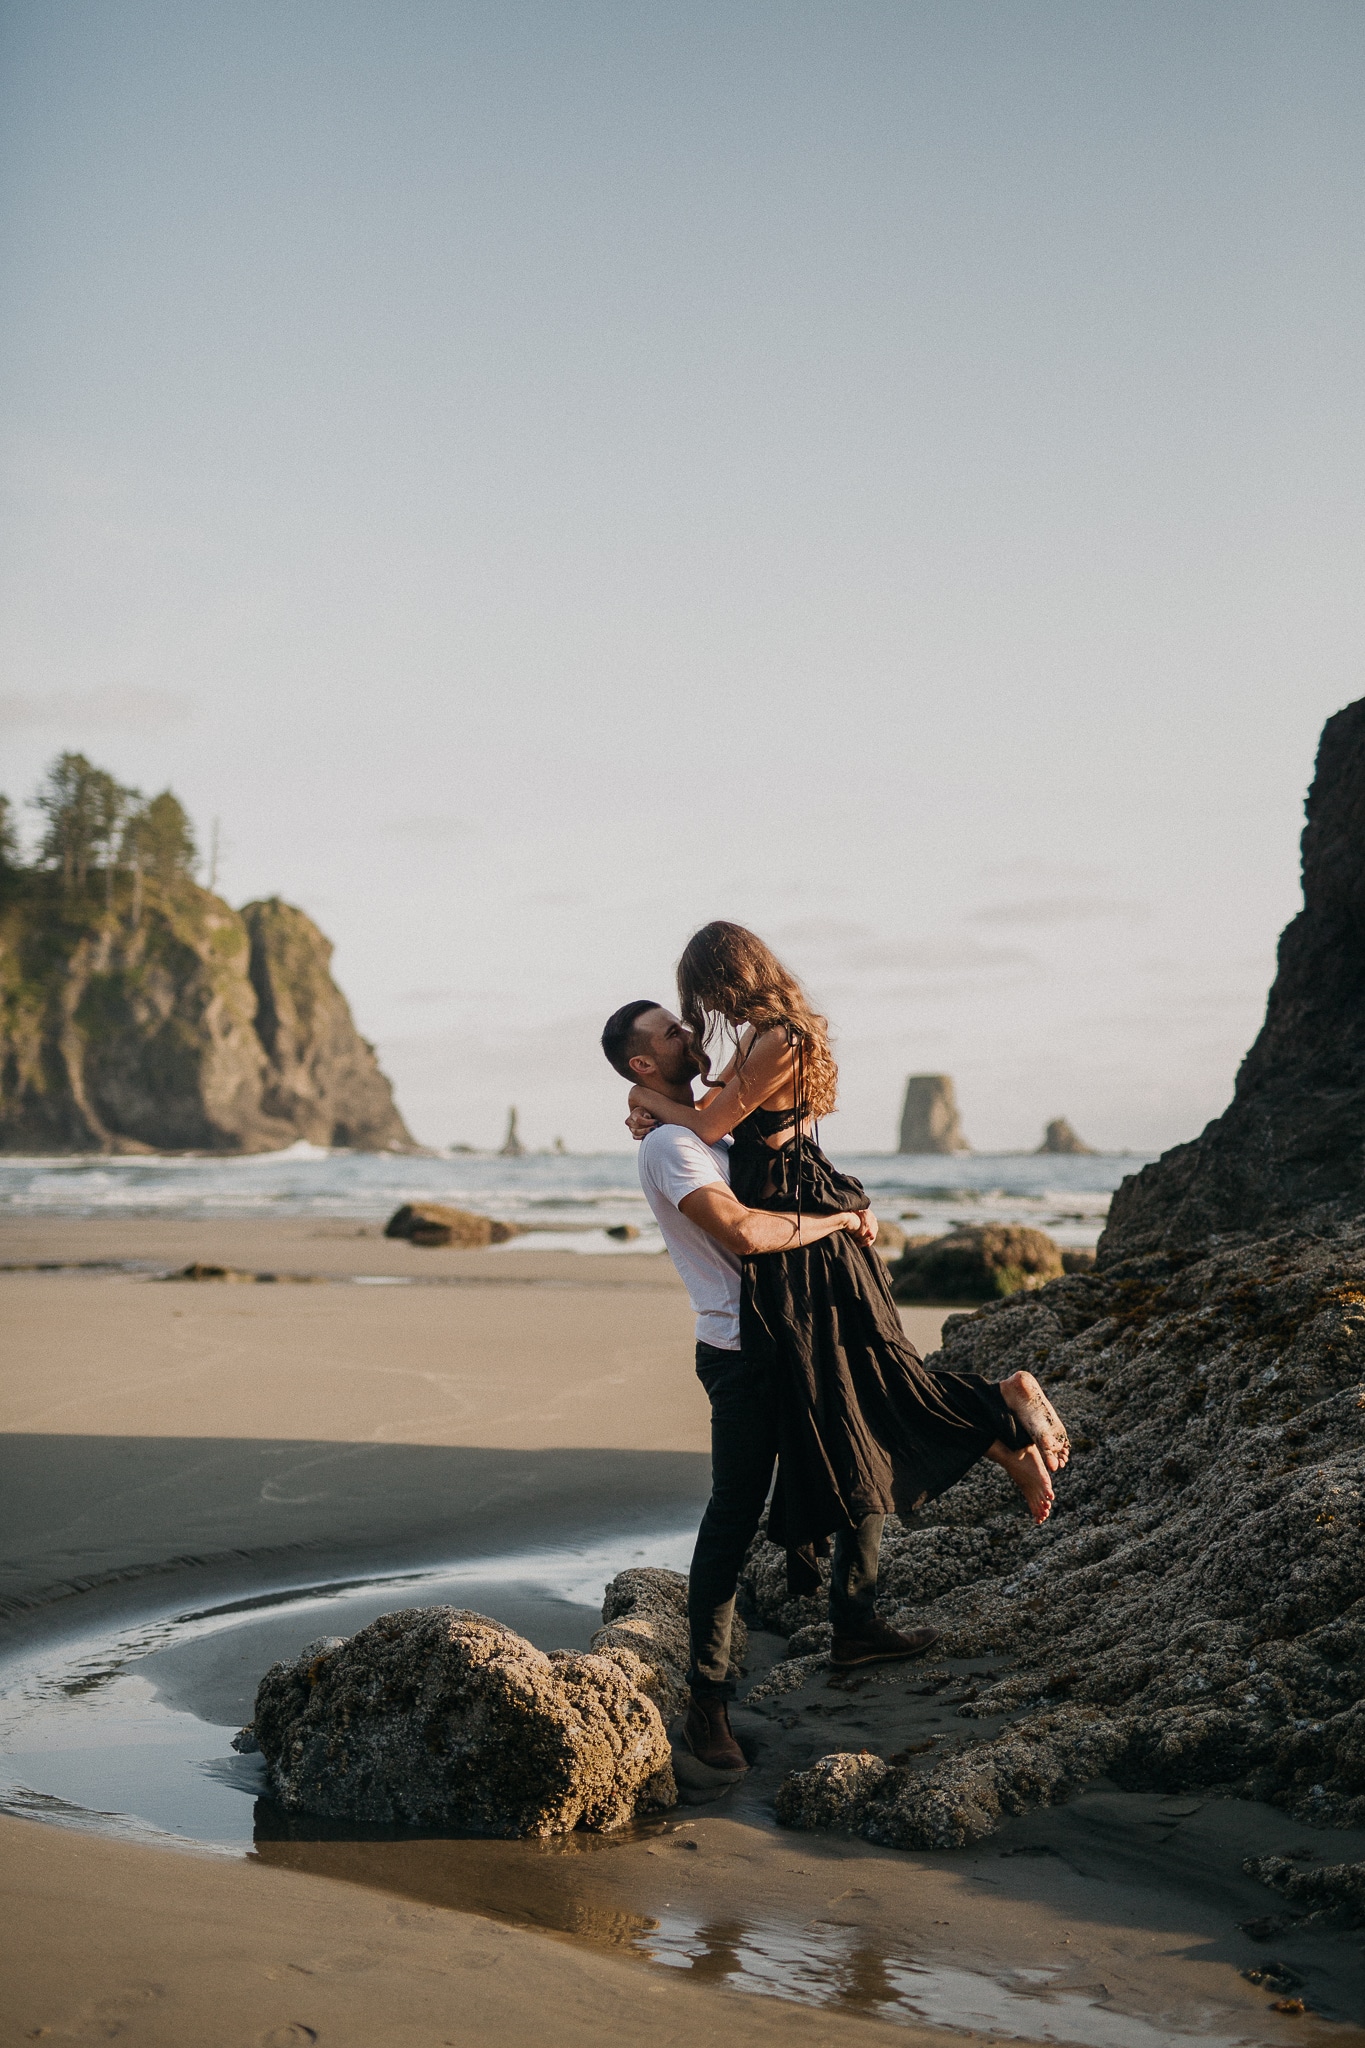 Olympic National Forest Engagement Photos, Olympic National Park Engagement Photos, Washington Engagement Photographer, La Push Beach engagement photos, Washington elopement photographer, Best elopement photographers in Washington, Best Washington engagement photographers, Fun Engagement photo ideas, beach Engagement photos, adventurous Engagement session, Save the date photo ideas, Olympic National Park La Push, adventure elopement photographer, la push beach Washington 